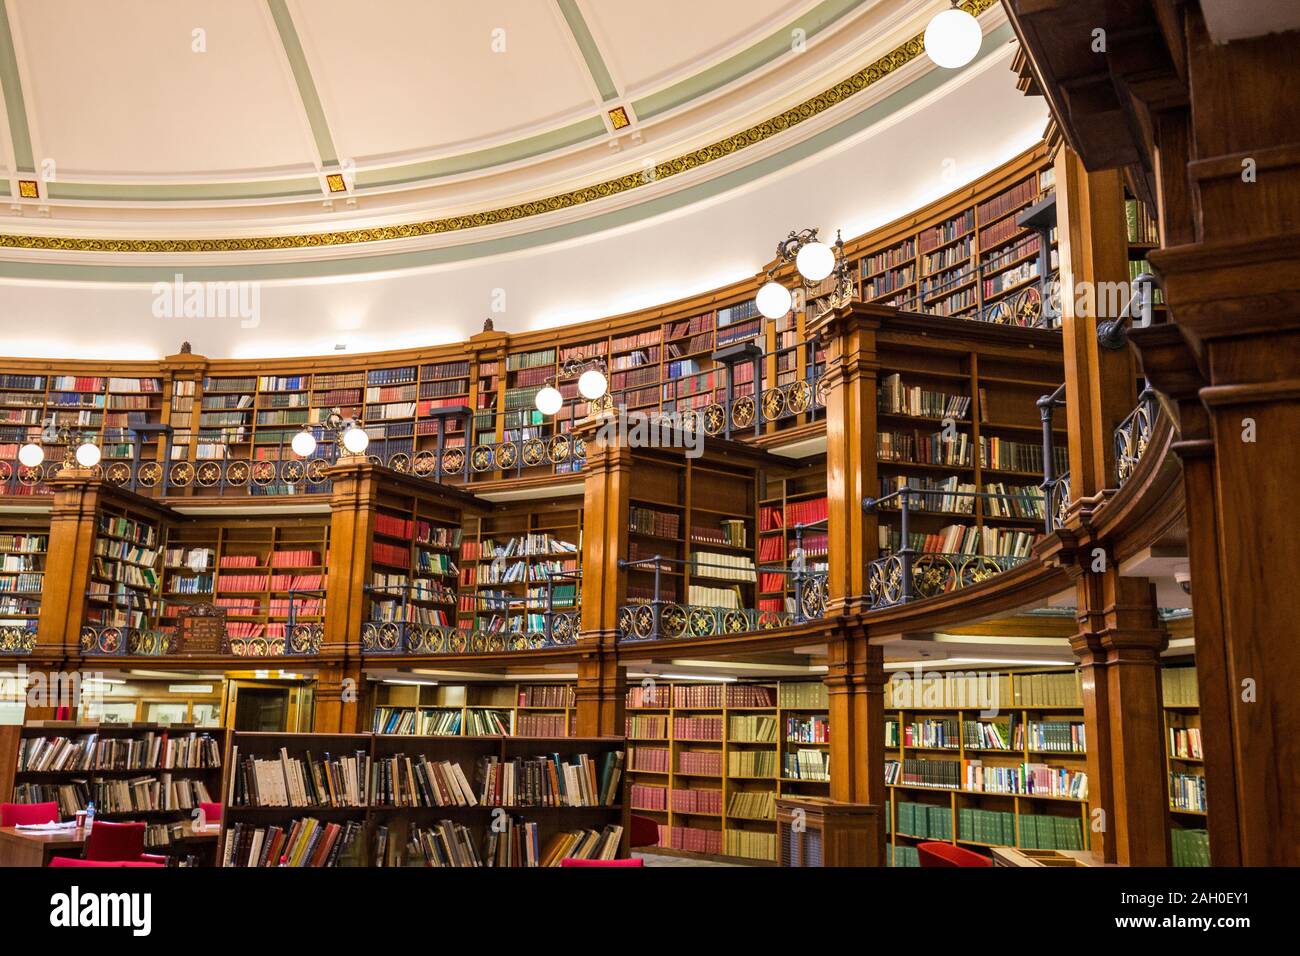 Liverpool Central Library inside a beautiful round reading room with a lot of books Stock Photo